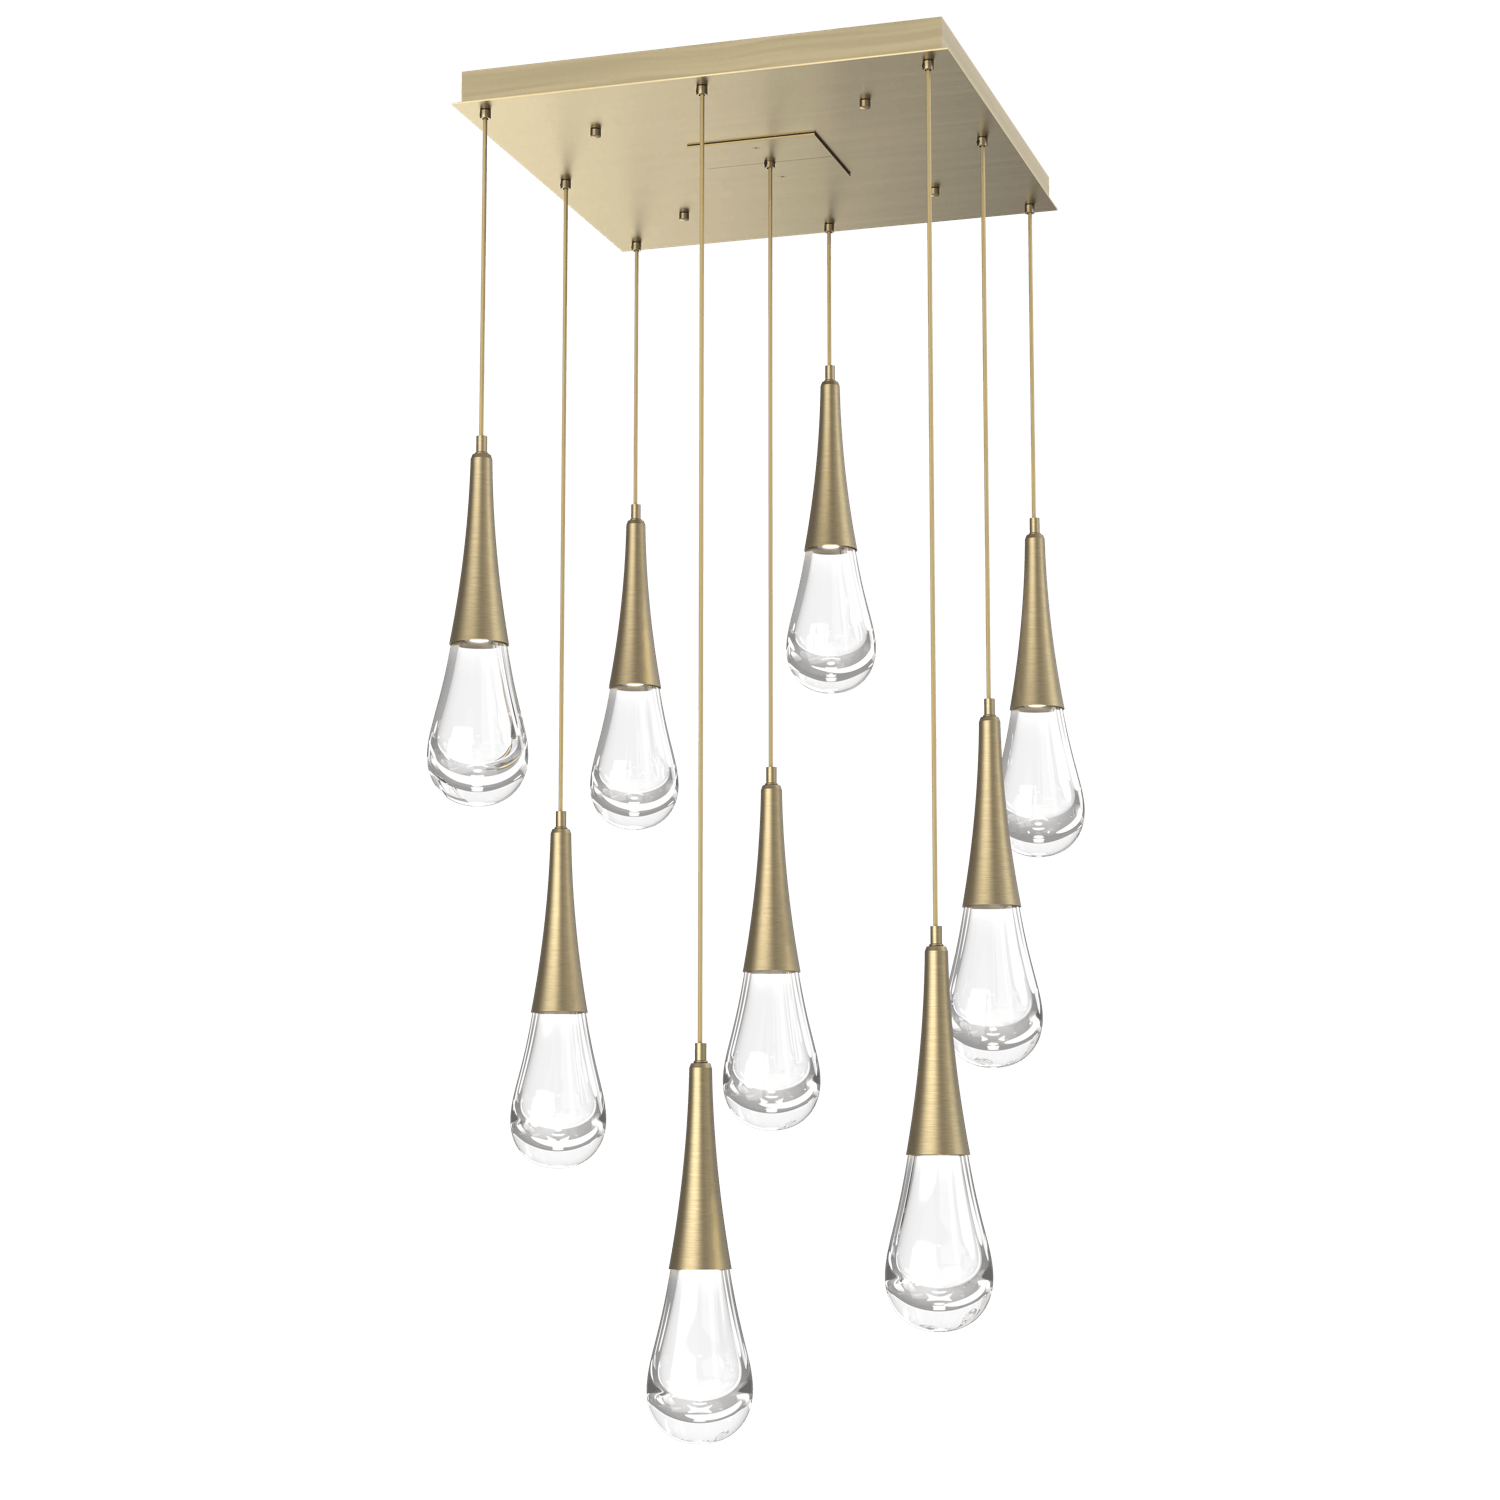 CHB0078-09-HB-Hammerton-Studio-Raindrop-9-light-square-pendant-chandelier-with-heritage-brass-finish-and-clear-blown-glass-shades-and-LED-lamping